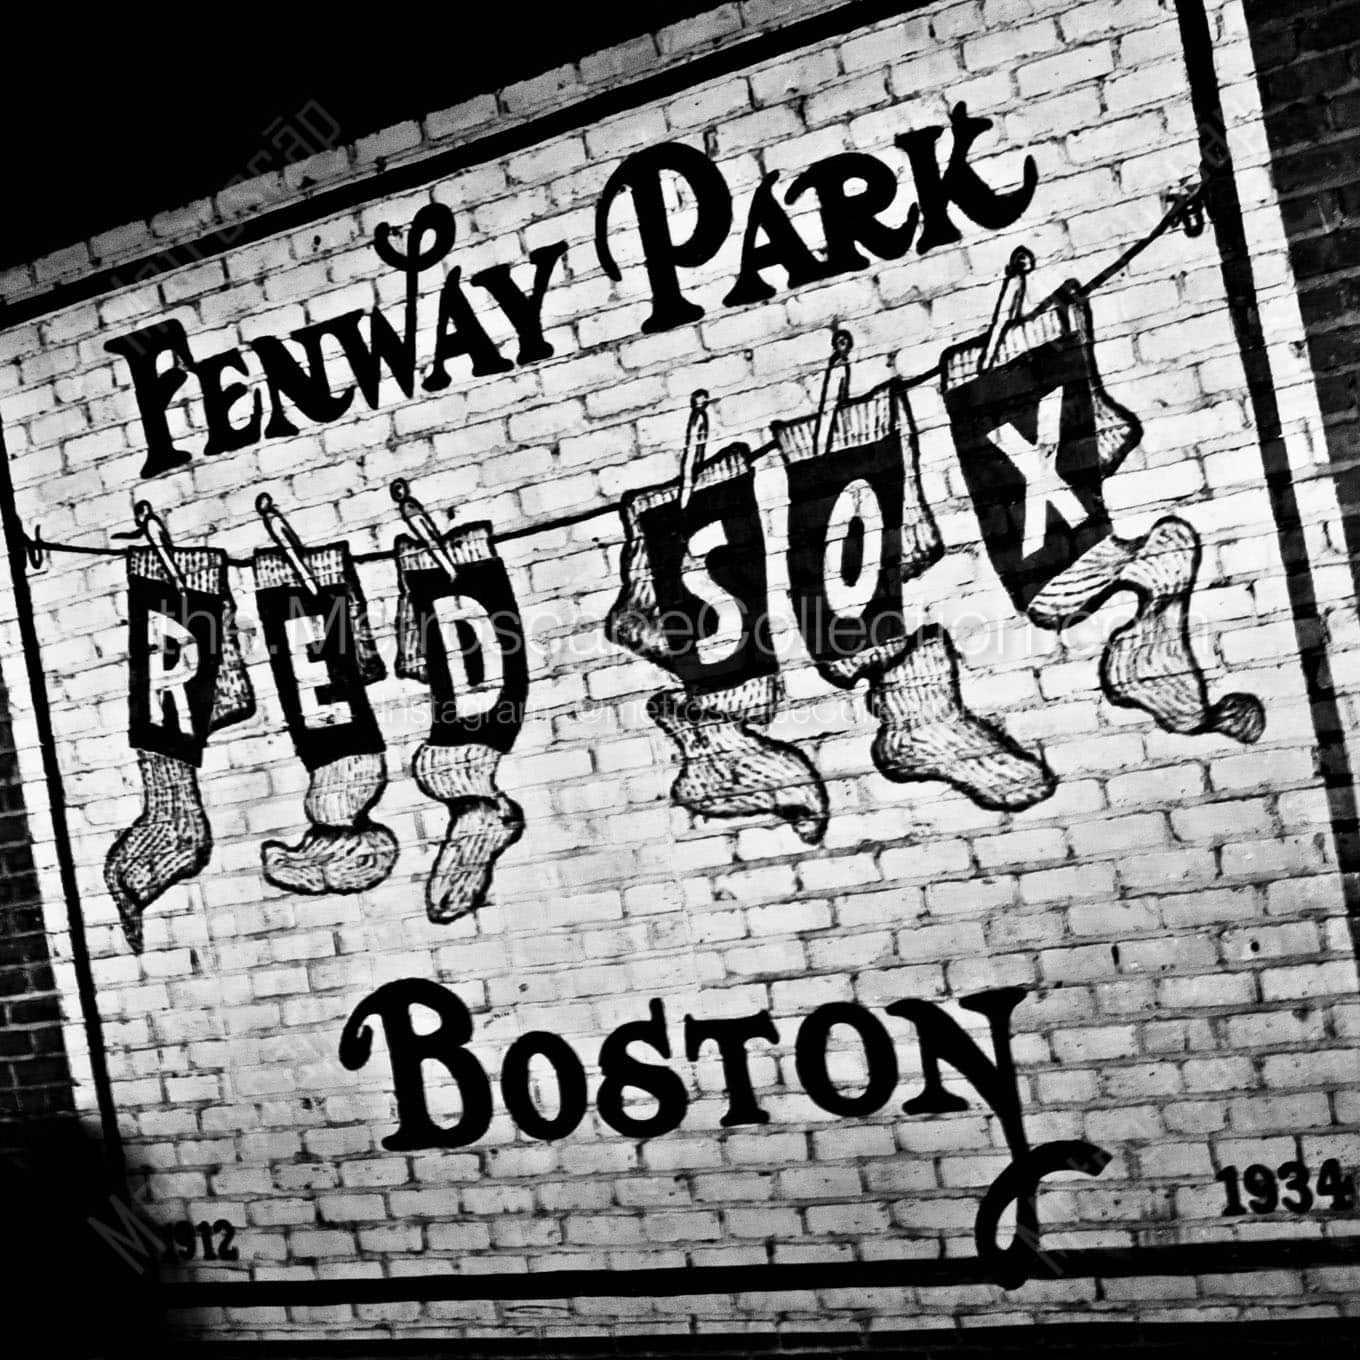 boston red sox wall mural in fenway park Black & White Office Art